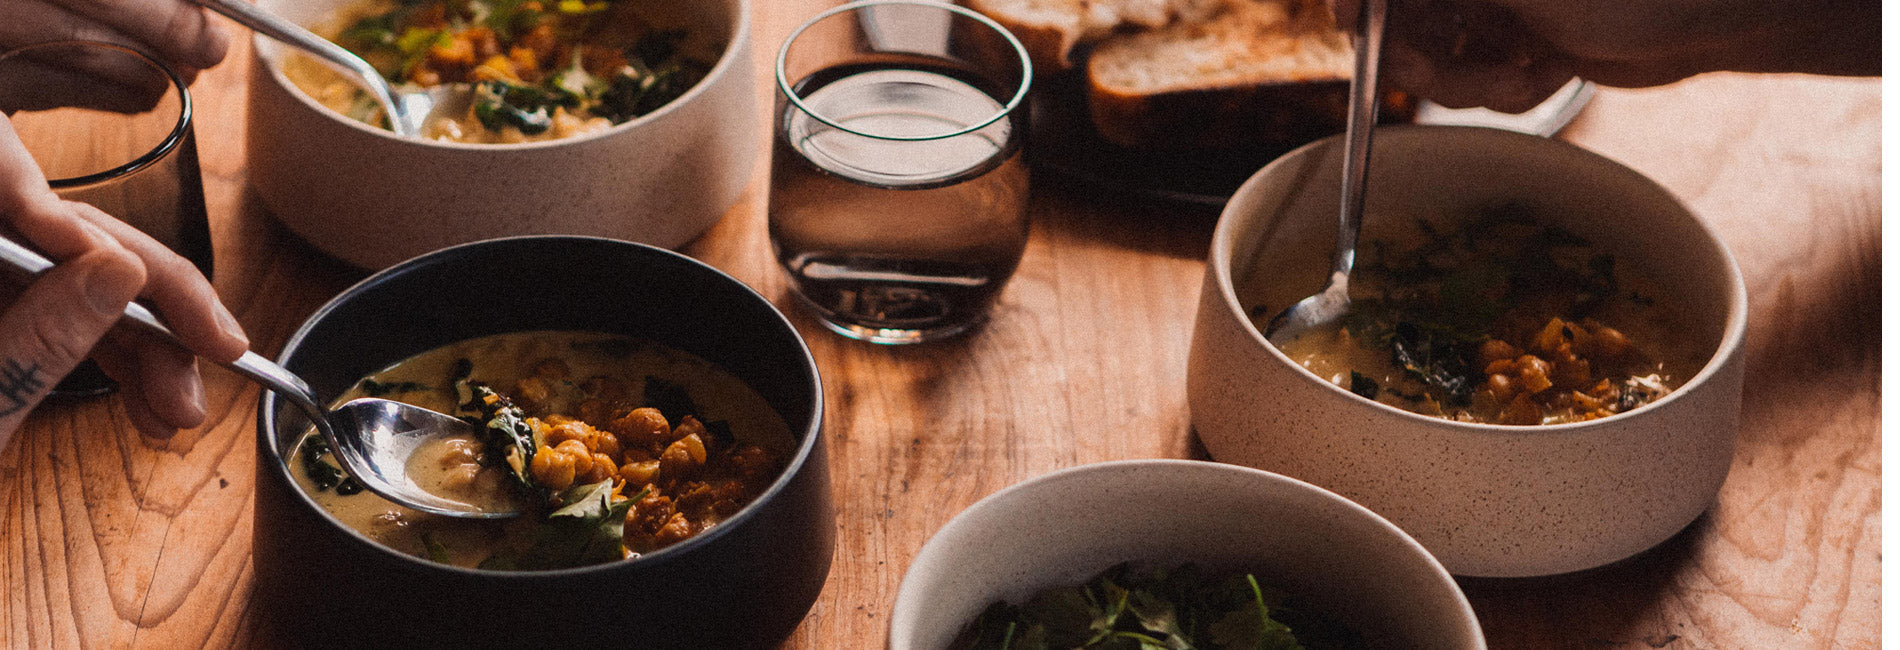 A close up dinner scene focusing on 4 ceramic bowls as spoons enter a chickpea like stew or curry.